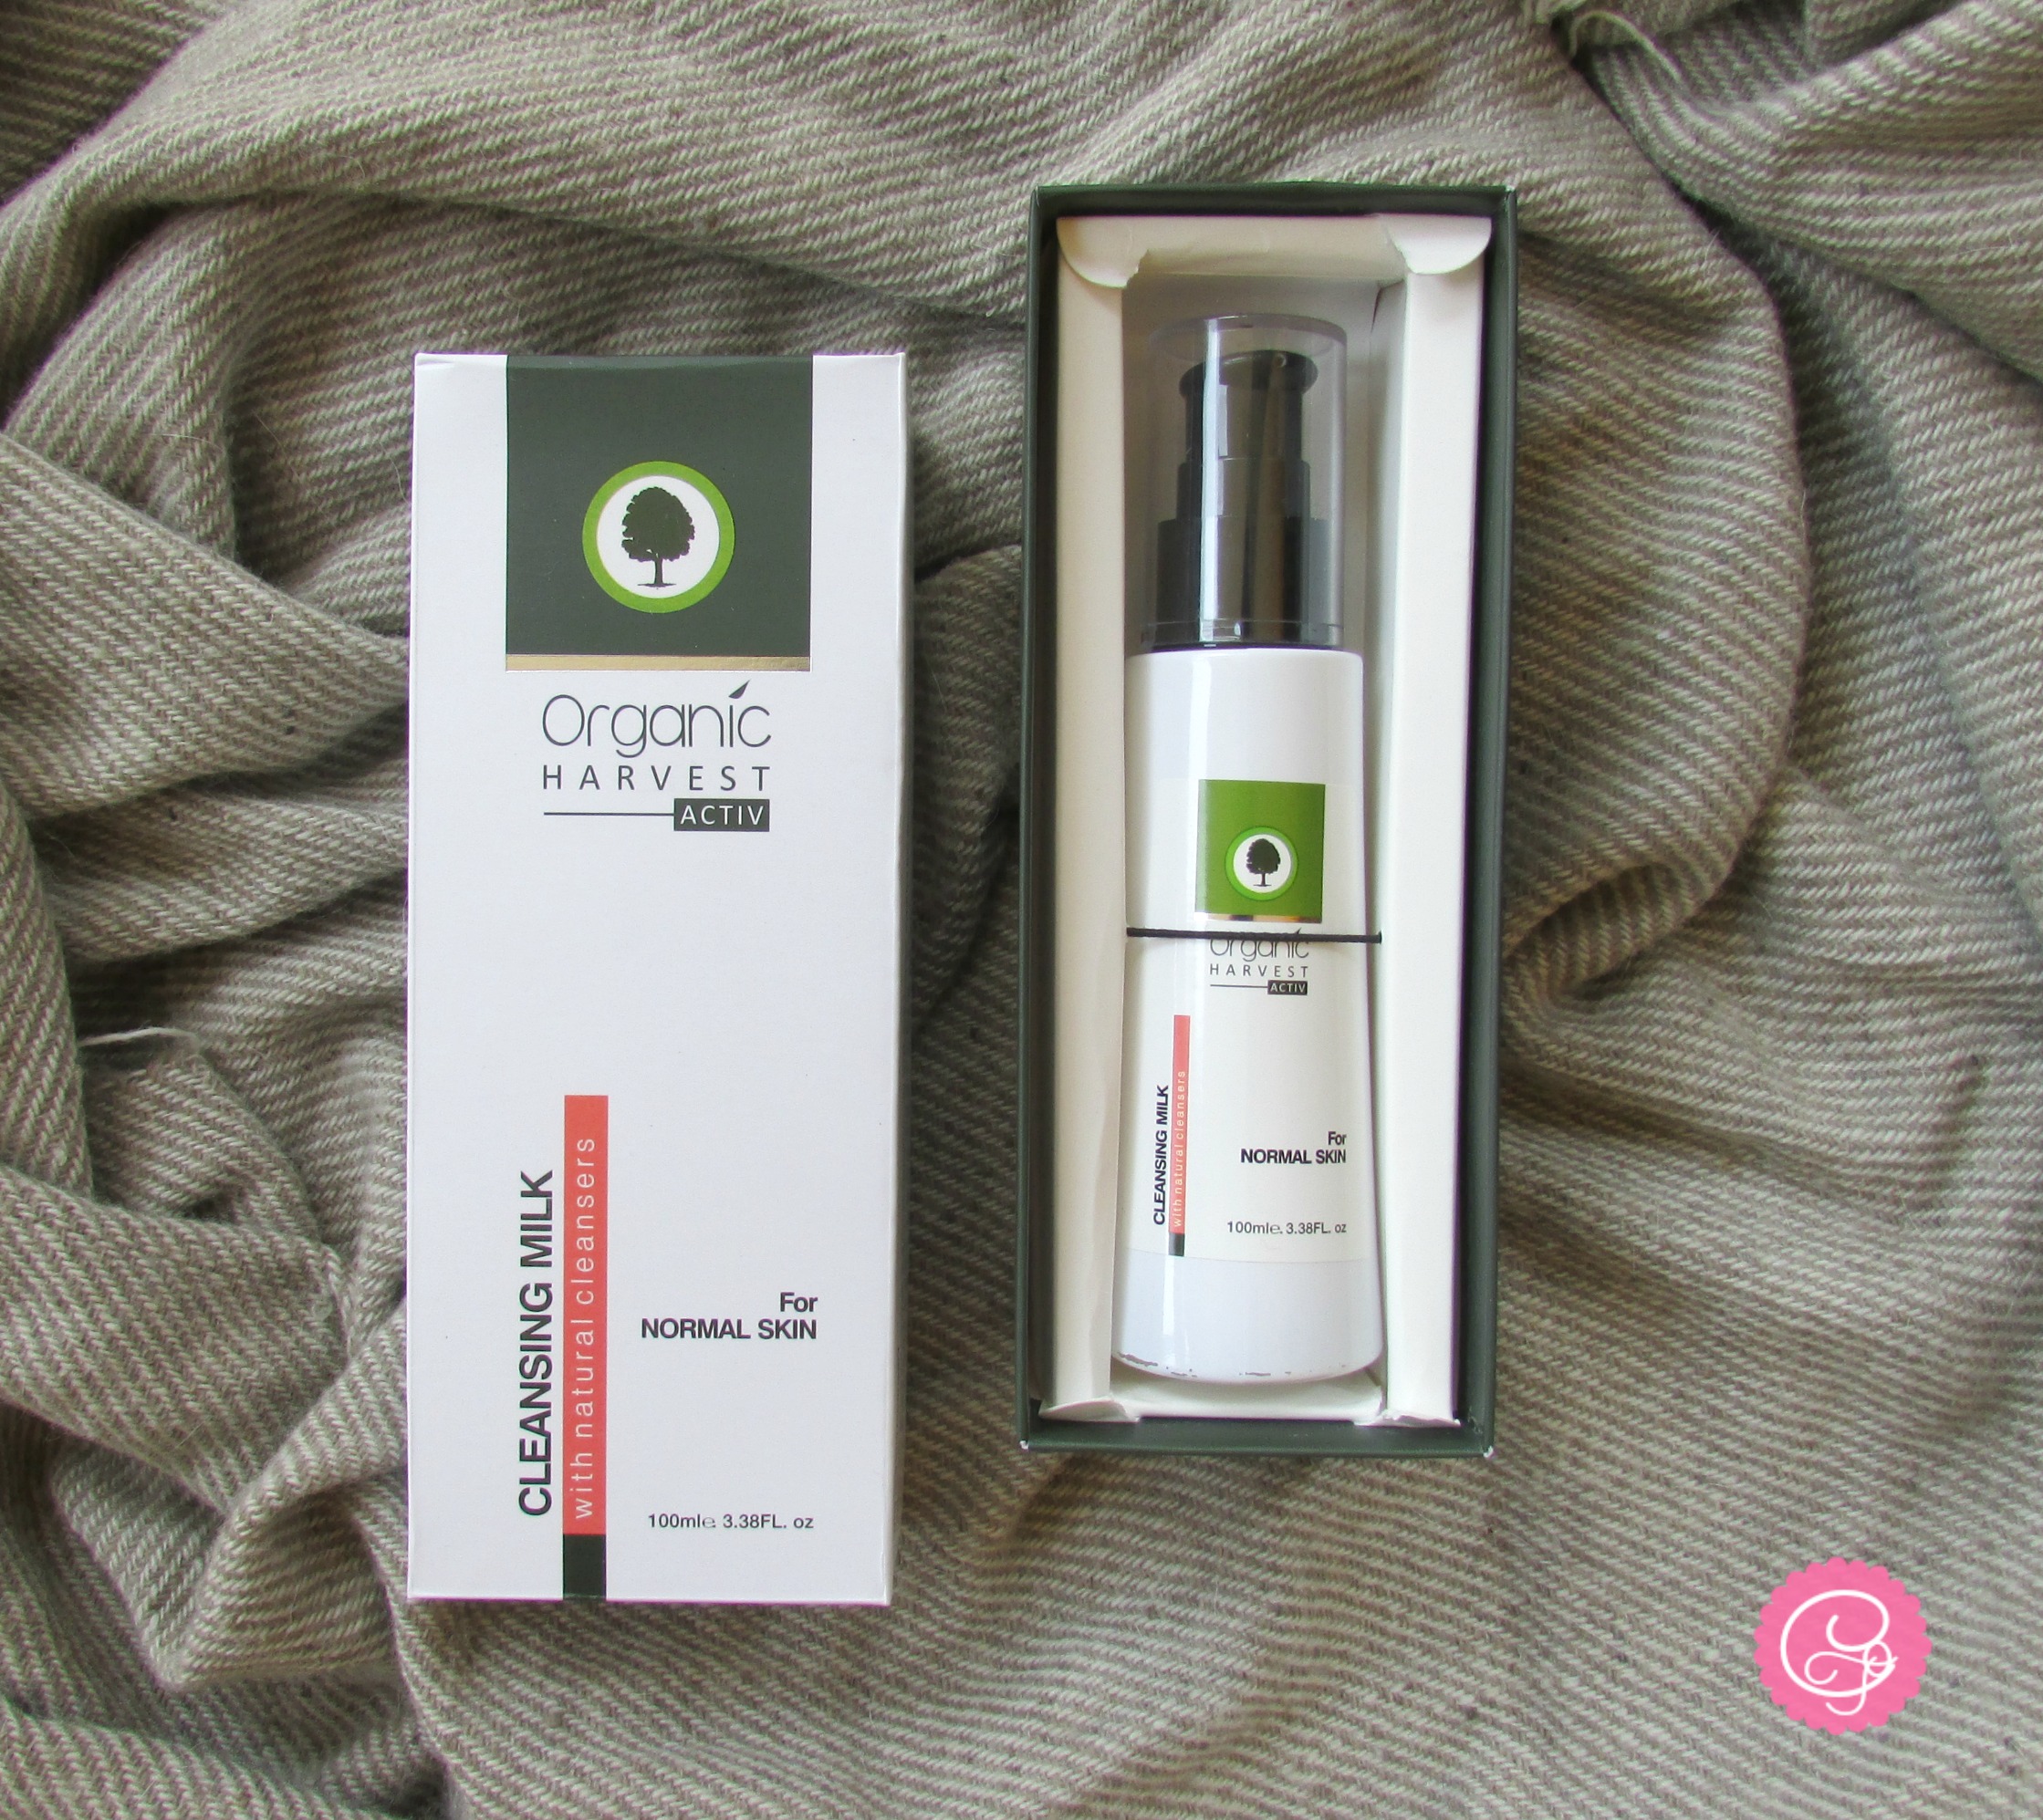 Organic Harvest Activ Cleansing Milk for Normal Skin Review & Price | Cherry On Top